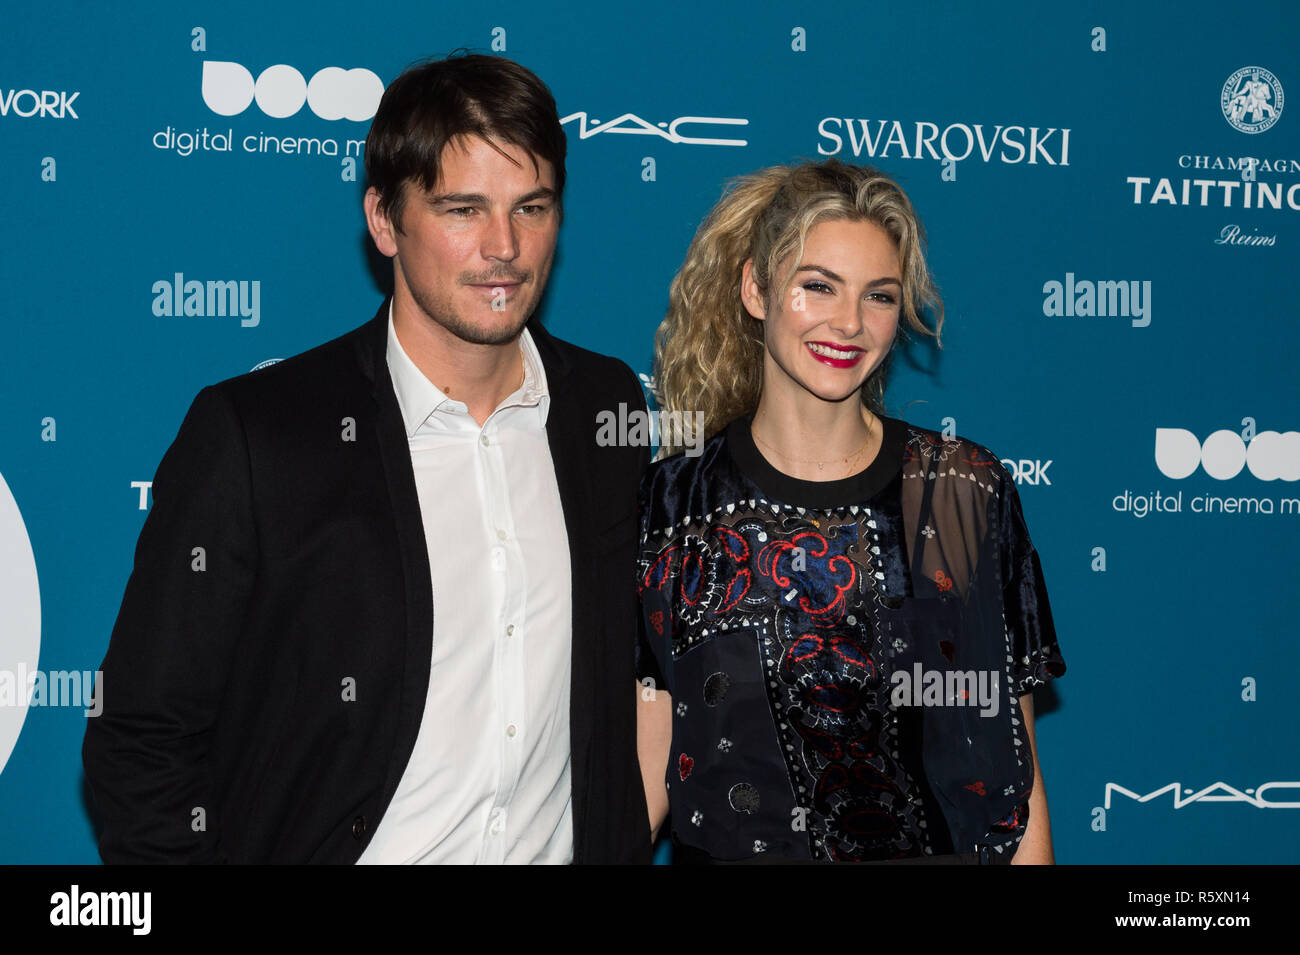 London, UK. 02nd December 2018. Josh Hartnett and Tamsin Egerton attend the 21st British Independent Film Awards (BIFAs) at Old Billingsgate in the City of London. Credit: Wiktor Szymanowicz/Alamy Live News Stock Photo